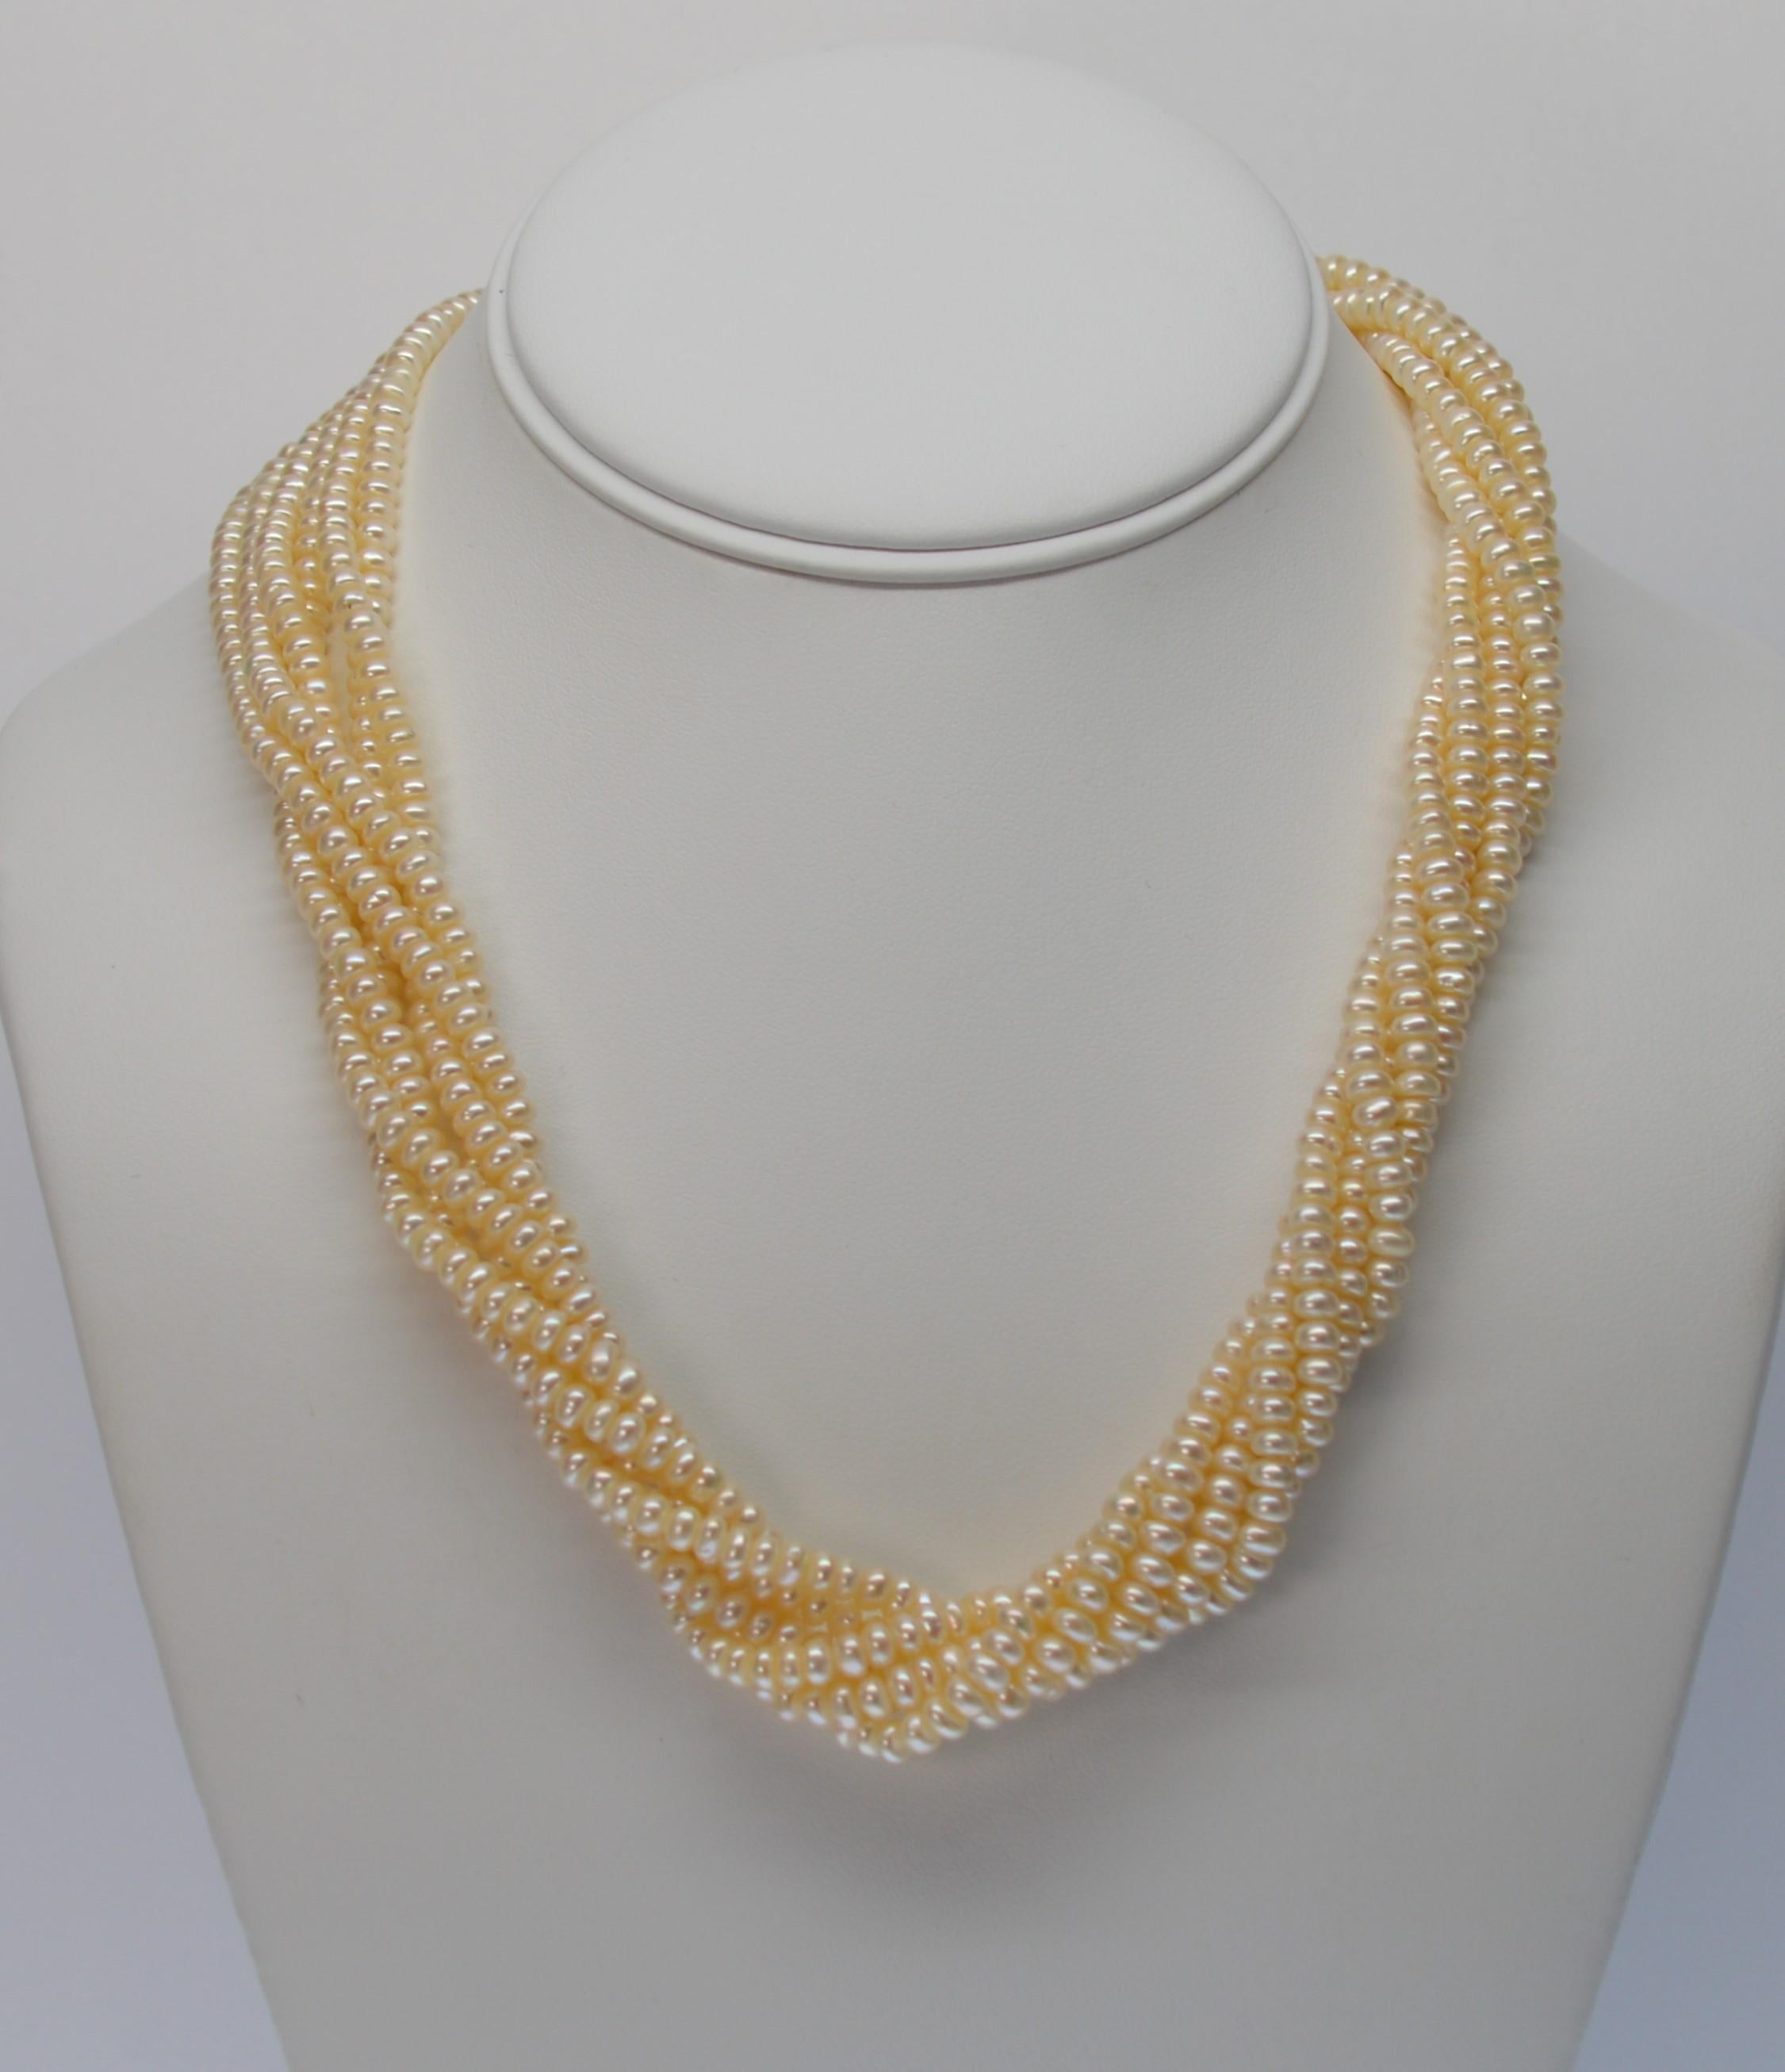 Bold 14K Yellow Gold Diamond Twin Lion Heads meet to make a powerful statement with this fine Akoya Pearl Six Strand Twist Style Necklace.
Eighteen inches of hand strung genuine Akoya Button Pearls measuring 4mm x 2.5mm tame these two big cats